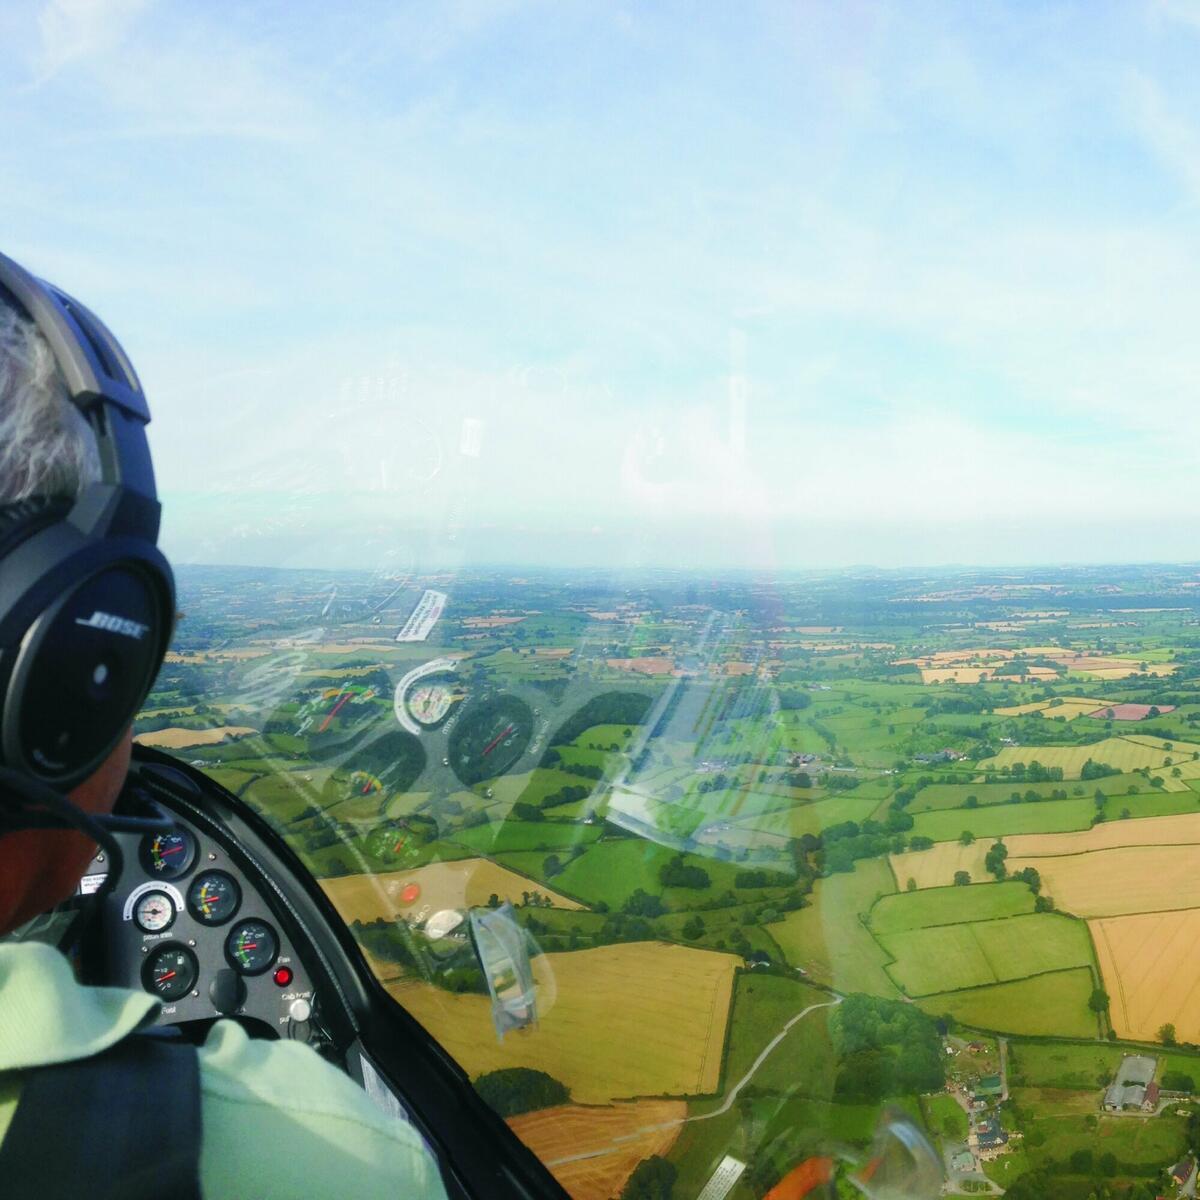 View from the backseat of a gyrocopter